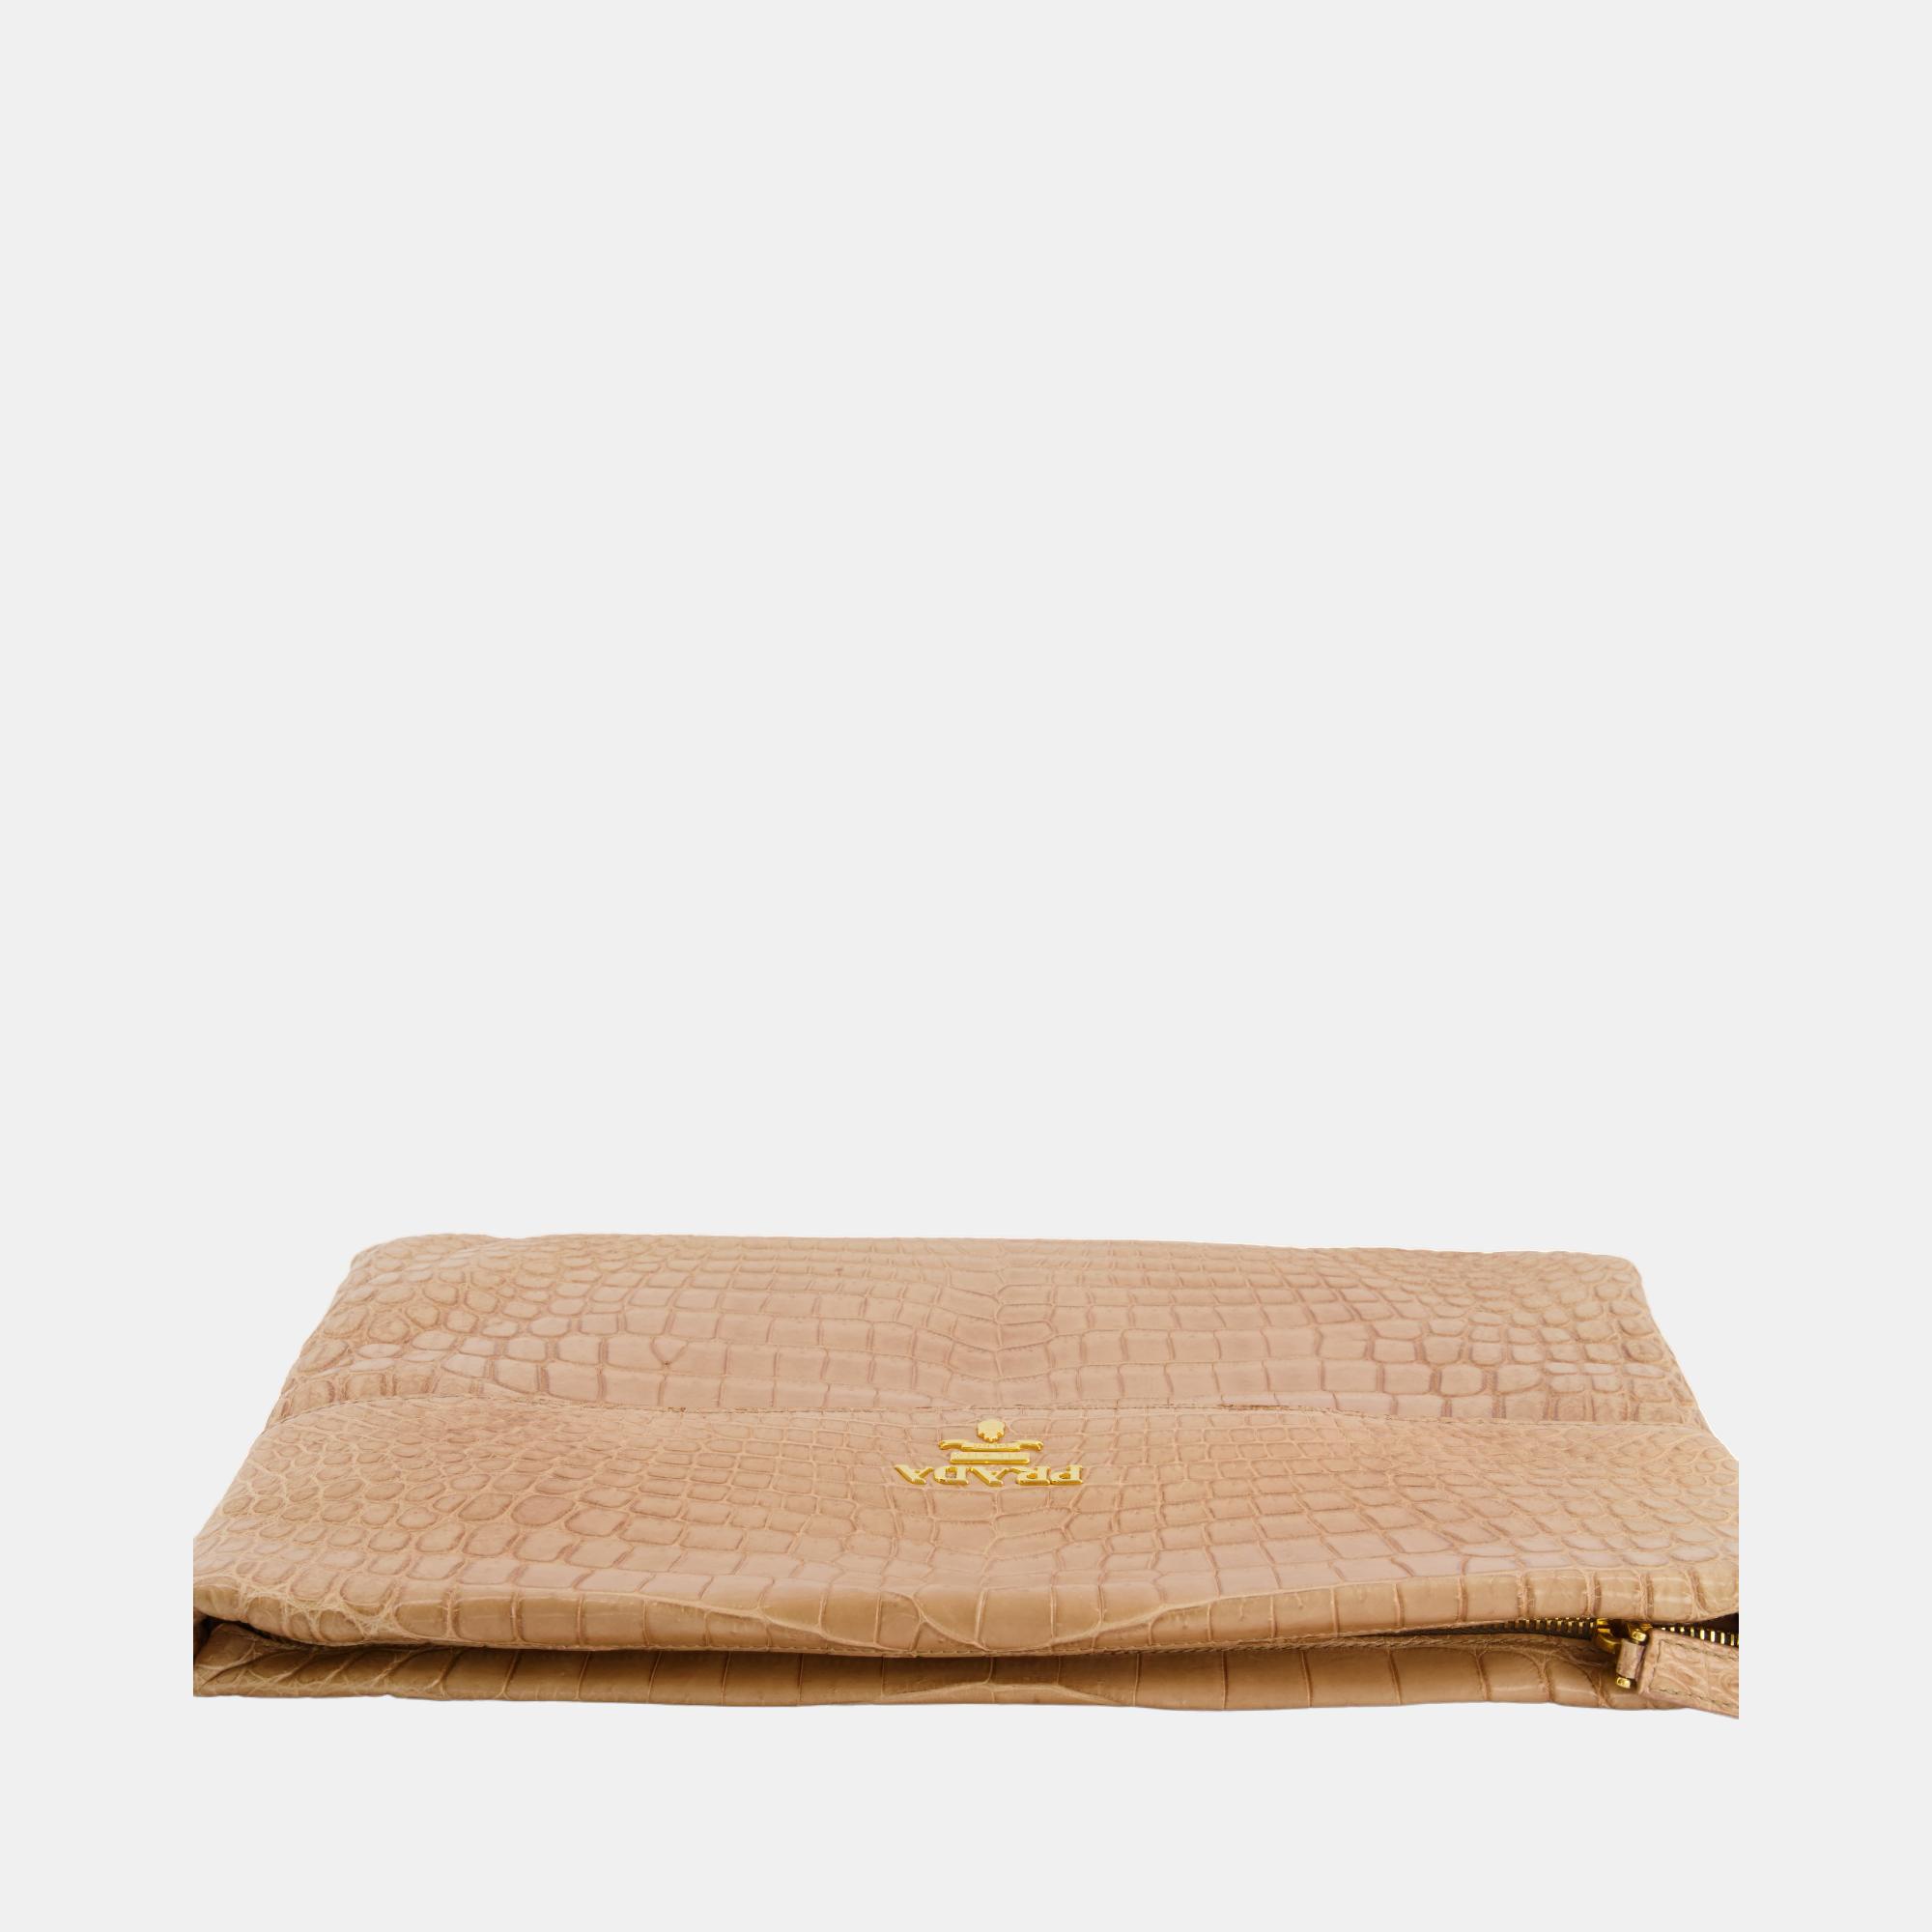 Prada Beige Crocodile Large Pouch Bag With Gold Hardware